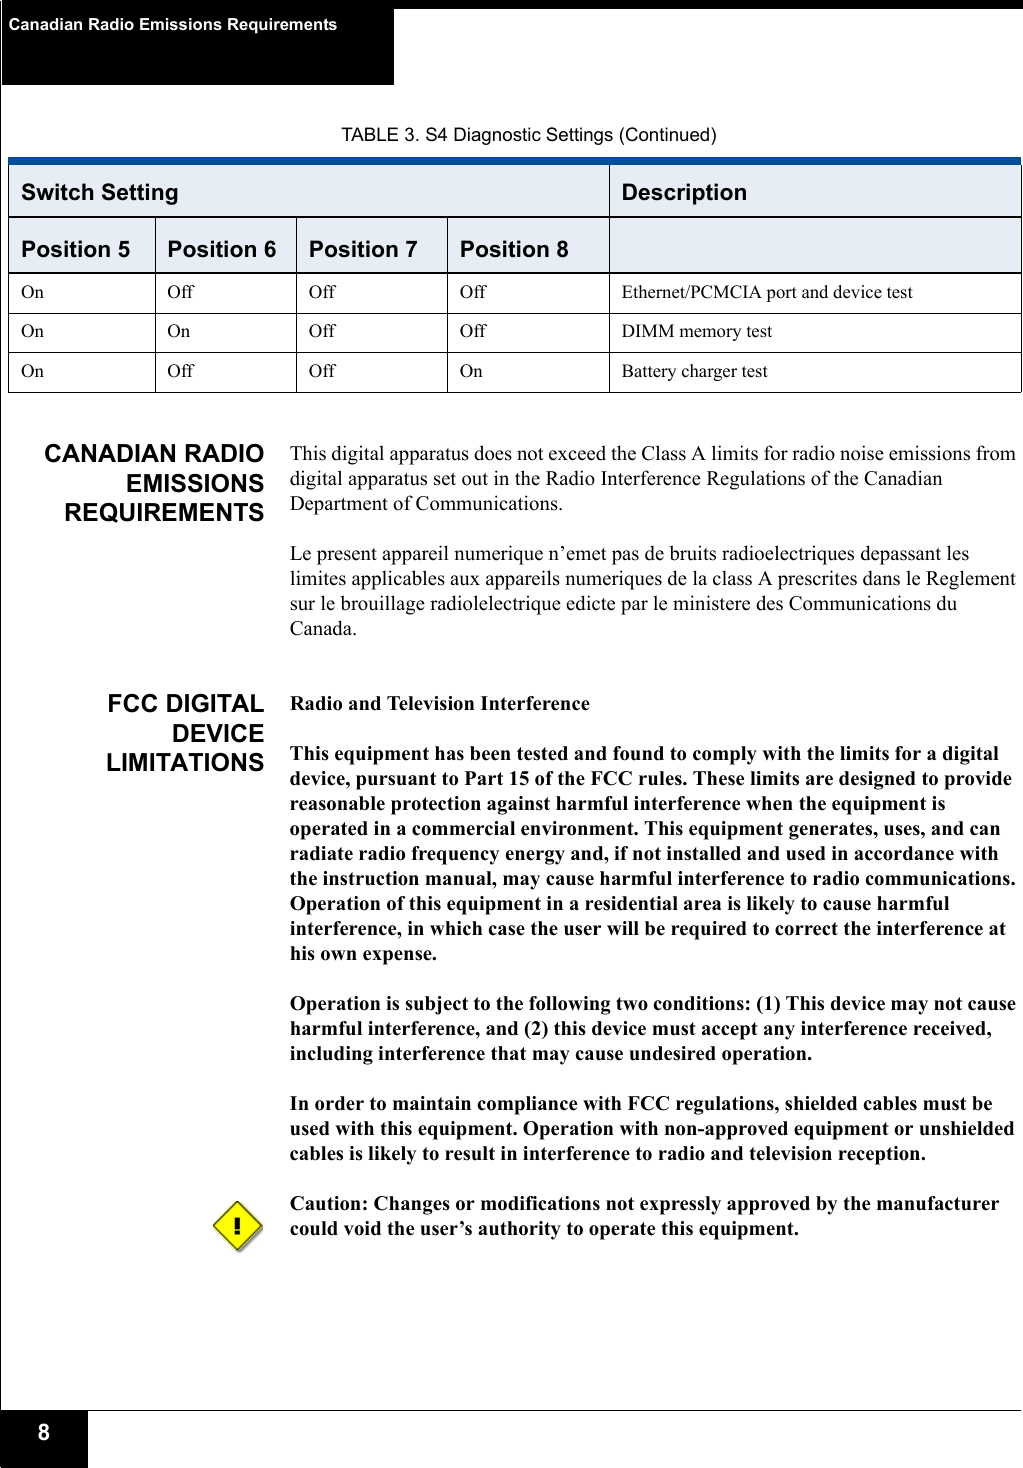 Canadian Radio Emissions Requirements8CANADIAN RADIOEMISSIONSREQUIREMENTSThis digital apparatus does not exceed the Class A limits for radio noise emissions from digital apparatus set out in the Radio Interference Regulations of the Canadian Department of Communications.Le present appareil numerique n’emet pas de bruits radioelectriques depassant les limites applicables aux appareils numeriques de la class A prescrites dans le Reglement sur le brouillage radiolelectrique edicte par le ministere des Communications du Canada.FCC DIGITALDEVICELIMITATIONSRadio and Television Interference This equipment has been tested and found to comply with the limits for a digital device, pursuant to Part 15 of the FCC rules. These limits are designed to provide reasonable protection against harmful interference when the equipment is operated in a commercial environment. This equipment generates, uses, and can radiate radio frequency energy and, if not installed and used in accordance with the instruction manual, may cause harmful interference to radio communications. Operation of this equipment in a residential area is likely to cause harmful interference, in which case the user will be required to correct the interference at his own expense. Operation is subject to the following two conditions: (1) This device may not cause harmful interference, and (2) this device must accept any interference received, including interference that may cause undesired operation. In order to maintain compliance with FCC regulations, shielded cables must be used with this equipment. Operation with non-approved equipment or unshielded cables is likely to result in interference to radio and television reception. Caution: Changes or modifications not expressly approved by the manufacturer could void the user’s authority to operate this equipment. On Off Off Off Ethernet/PCMCIA port and device testOn On Off Off DIMM memory testOn Off Off On Battery charger testTABLE 3. S4 Diagnostic Settings (Continued)Switch Setting DescriptionPosition 5 Position 6 Position 7 Position 8